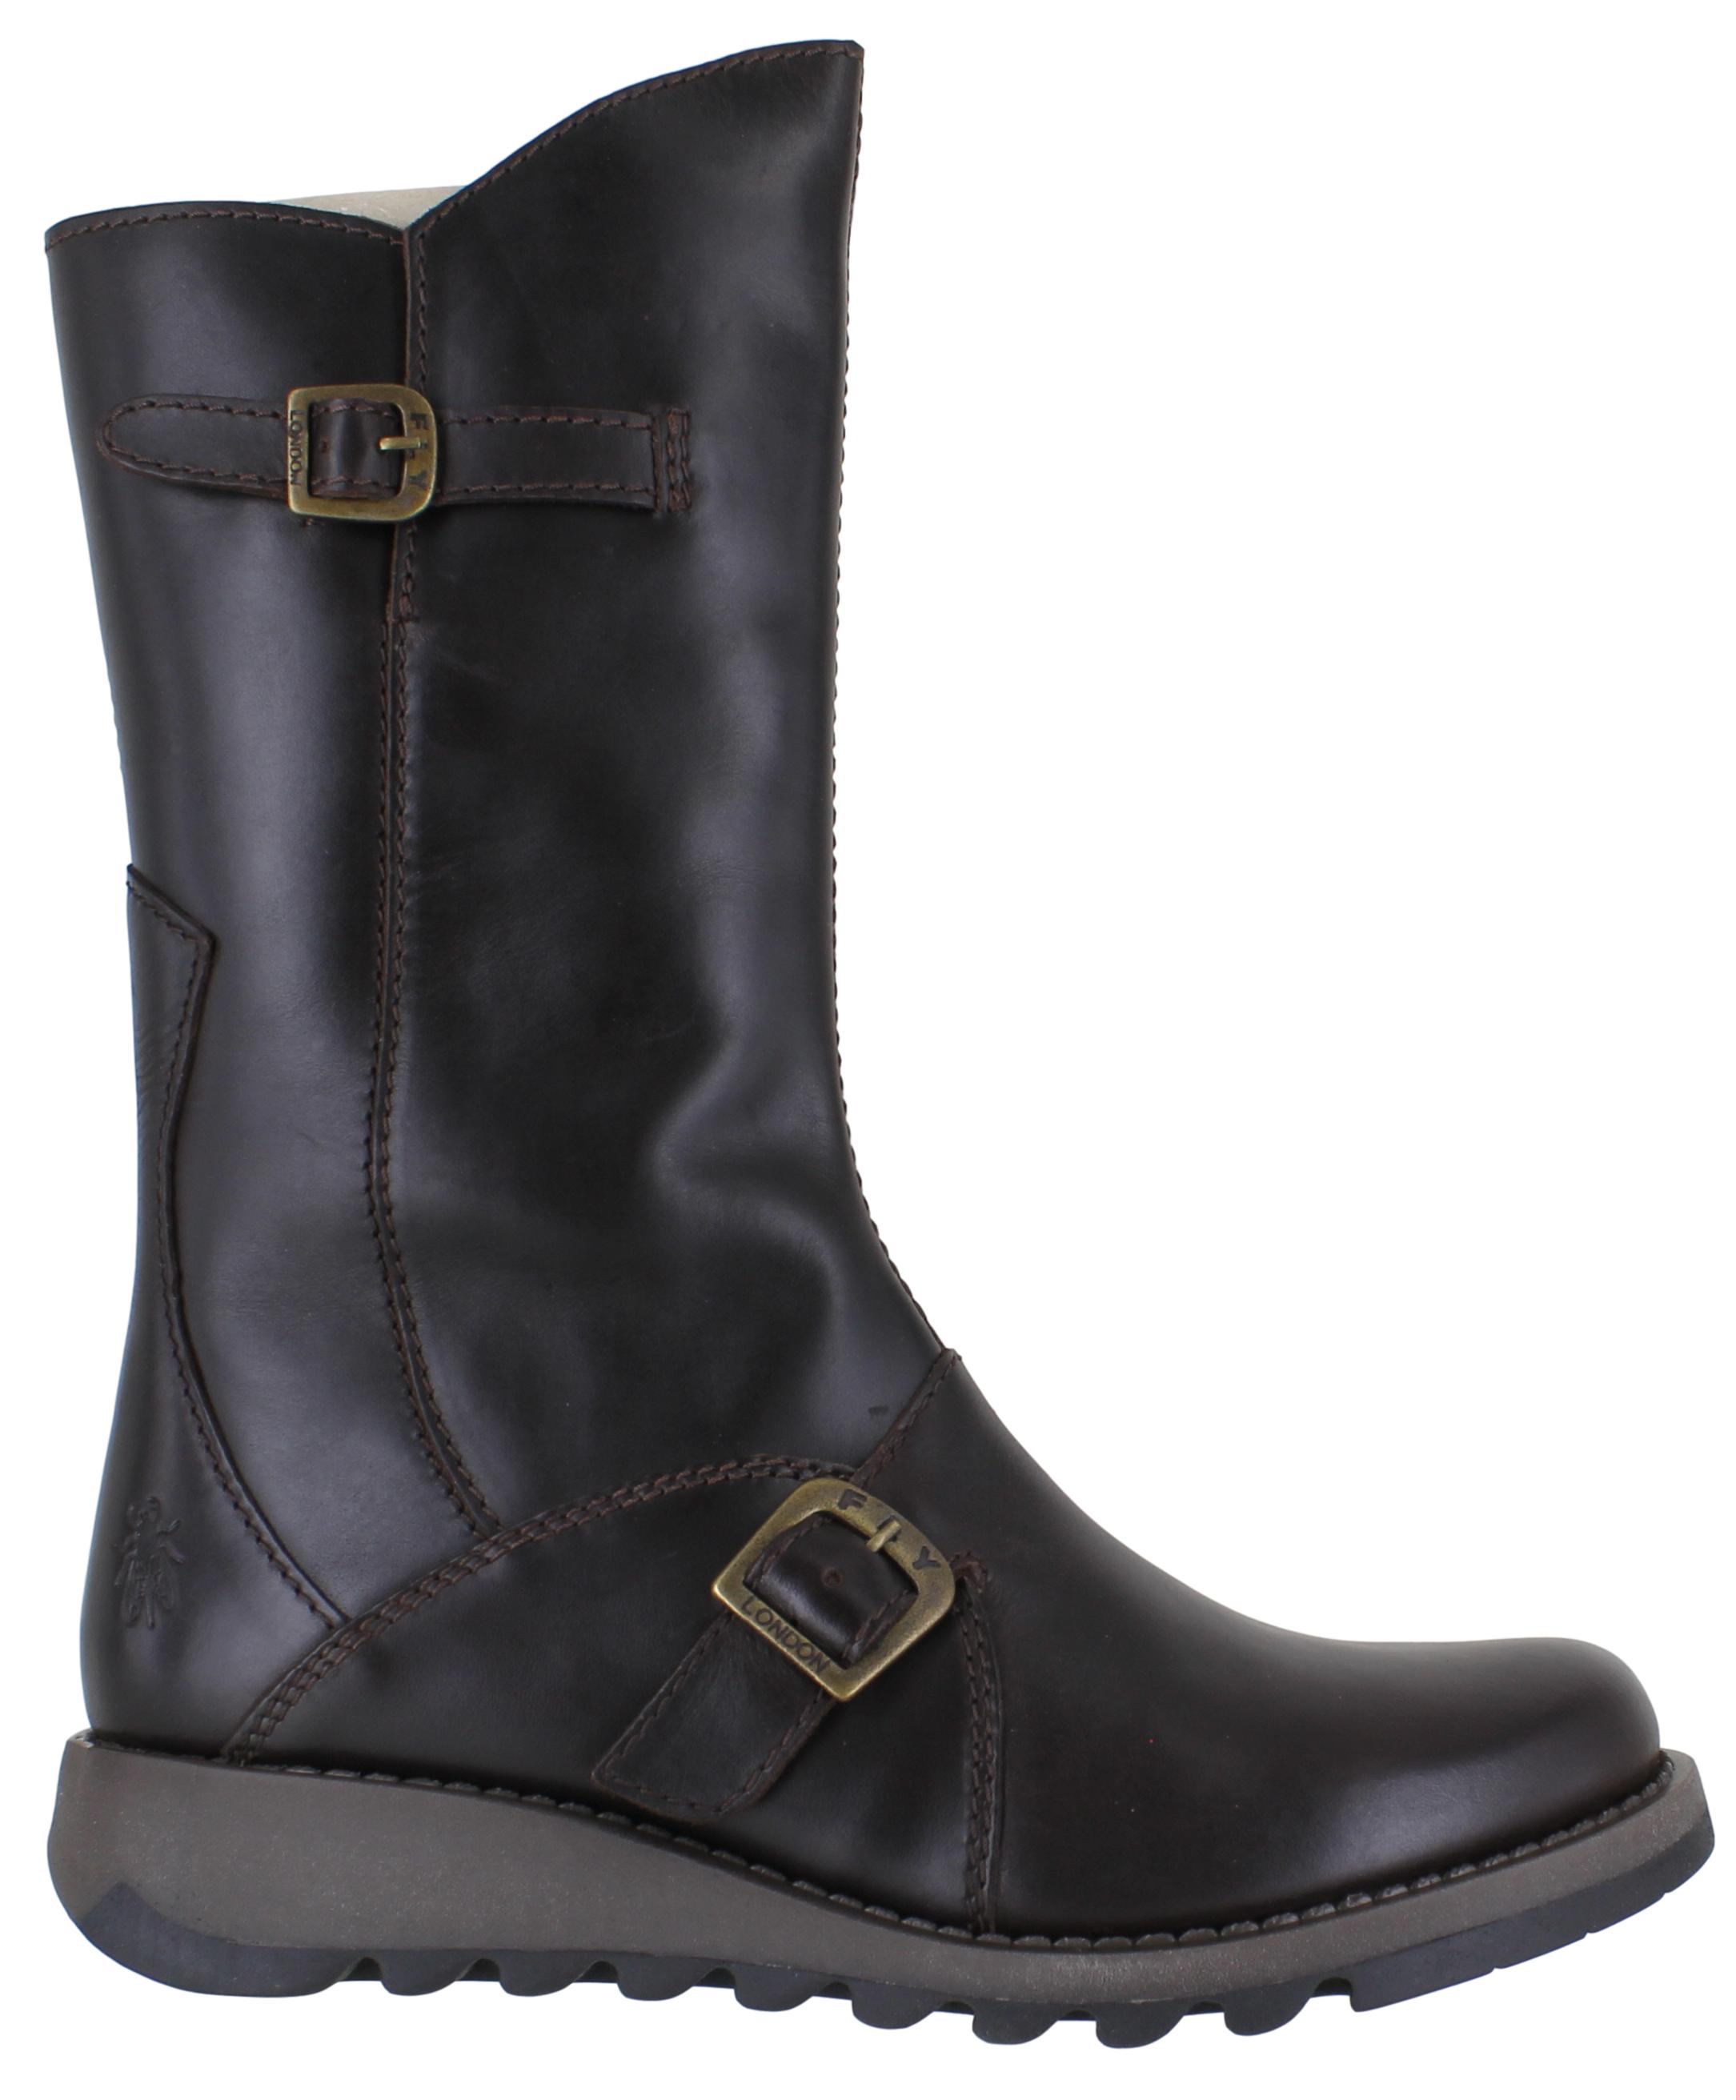 Womens Fly London Mes 2 Wedge Heel Leather Buckle Mid-Calf Boots Sizes ...